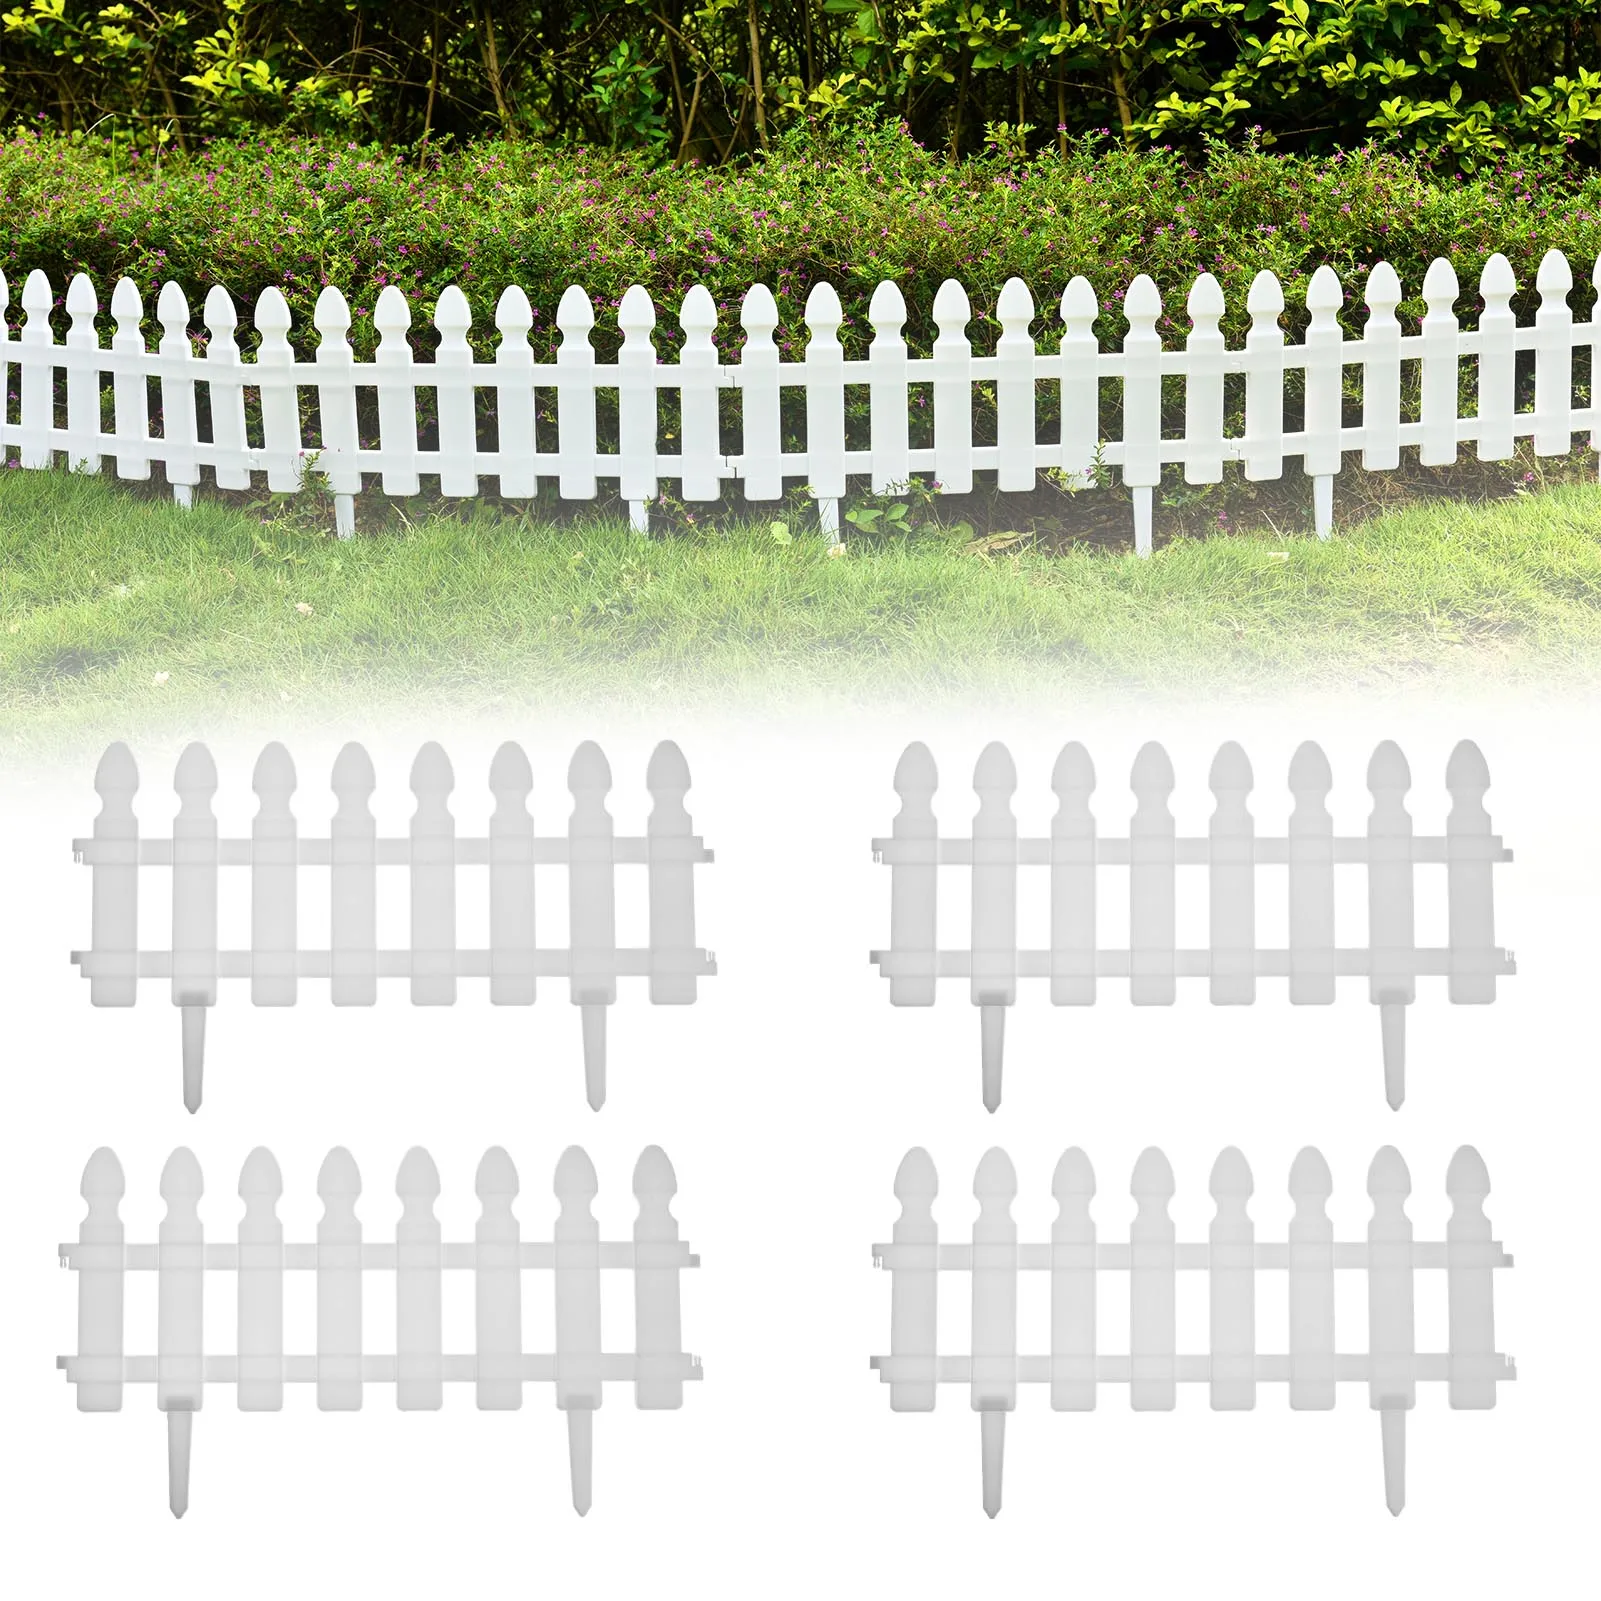 4pcs Plastic Garden Lawn Border Pannels Lan Outdoor Edging Colorado Springs Mall Max 53% OFF Fence